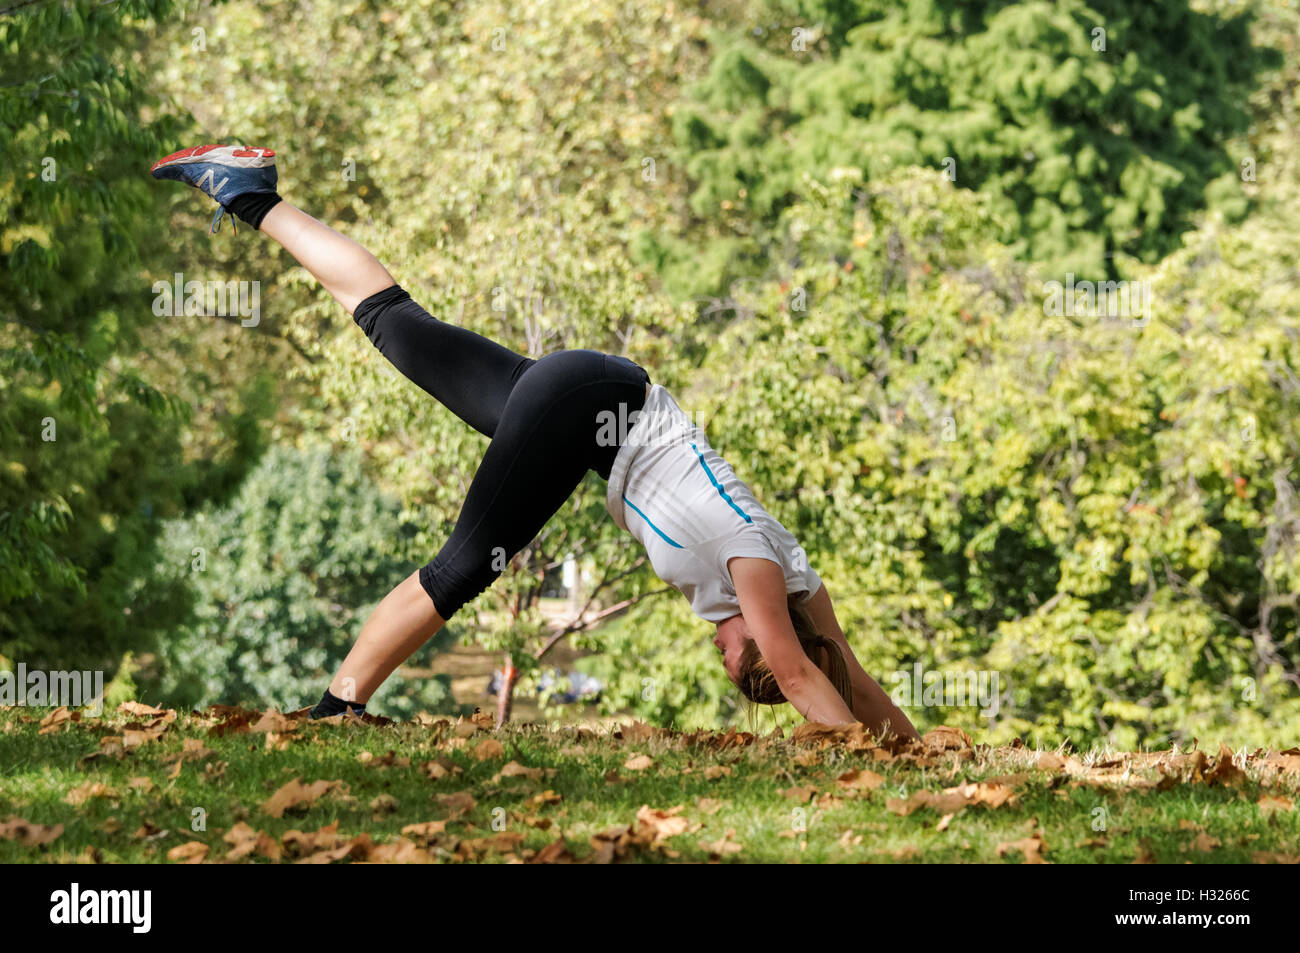 A woman practices yoga in St James's Park in London, England United Kingdom UK Stock Photo